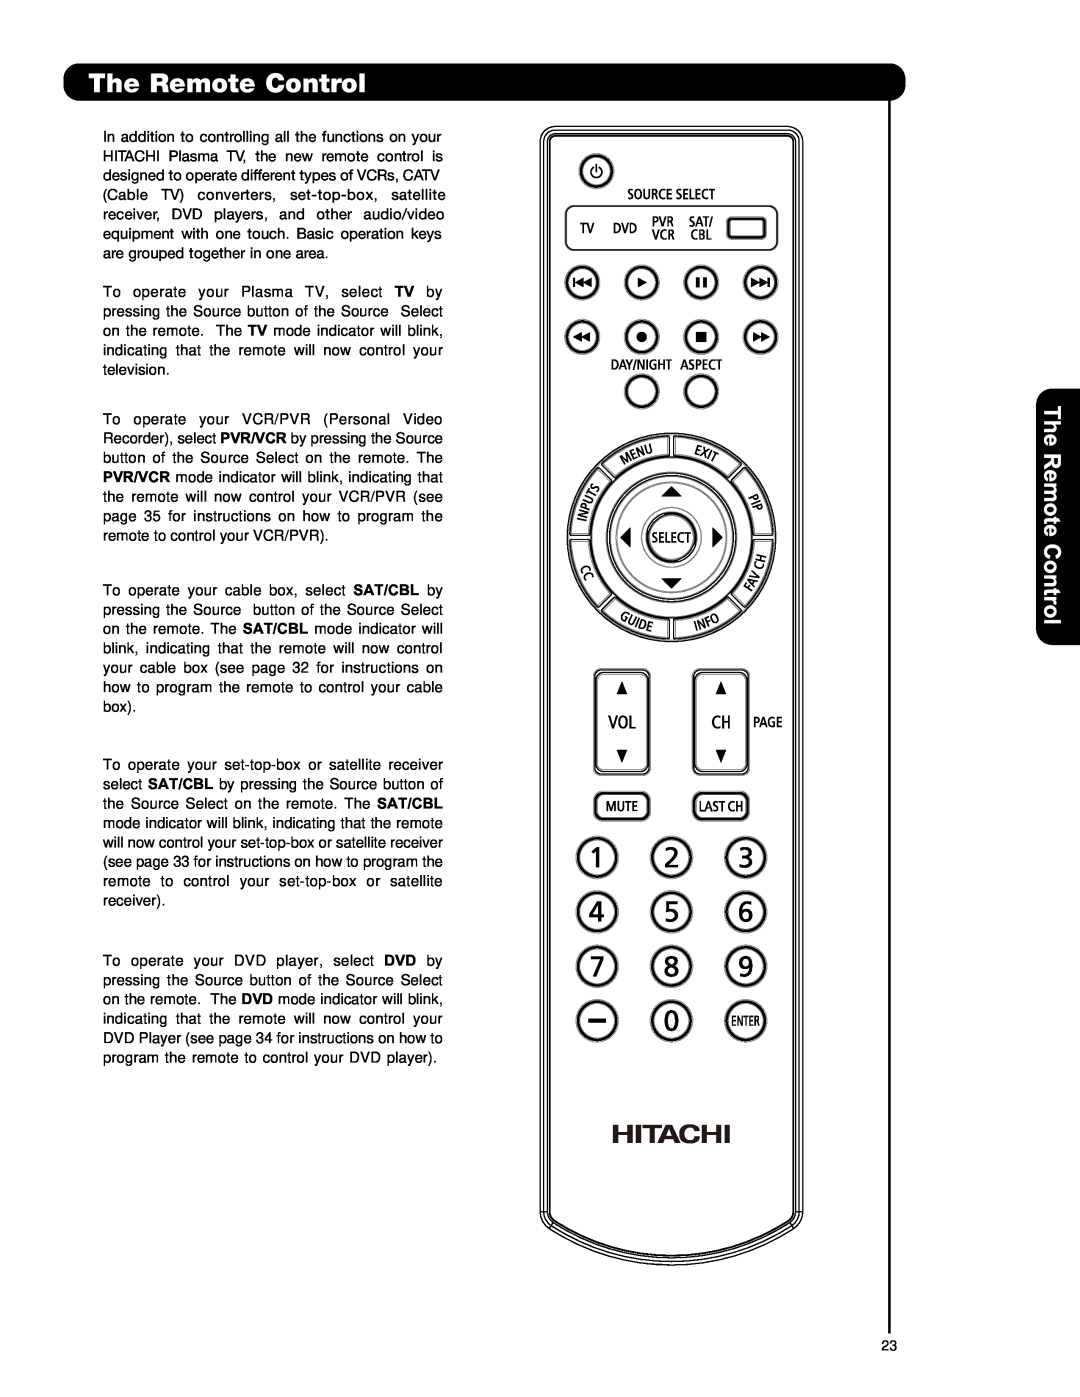 Hitachi P42T501, P42T501A, P50T501, P50T501A, P55T551 important safety instructions The Remote Control 